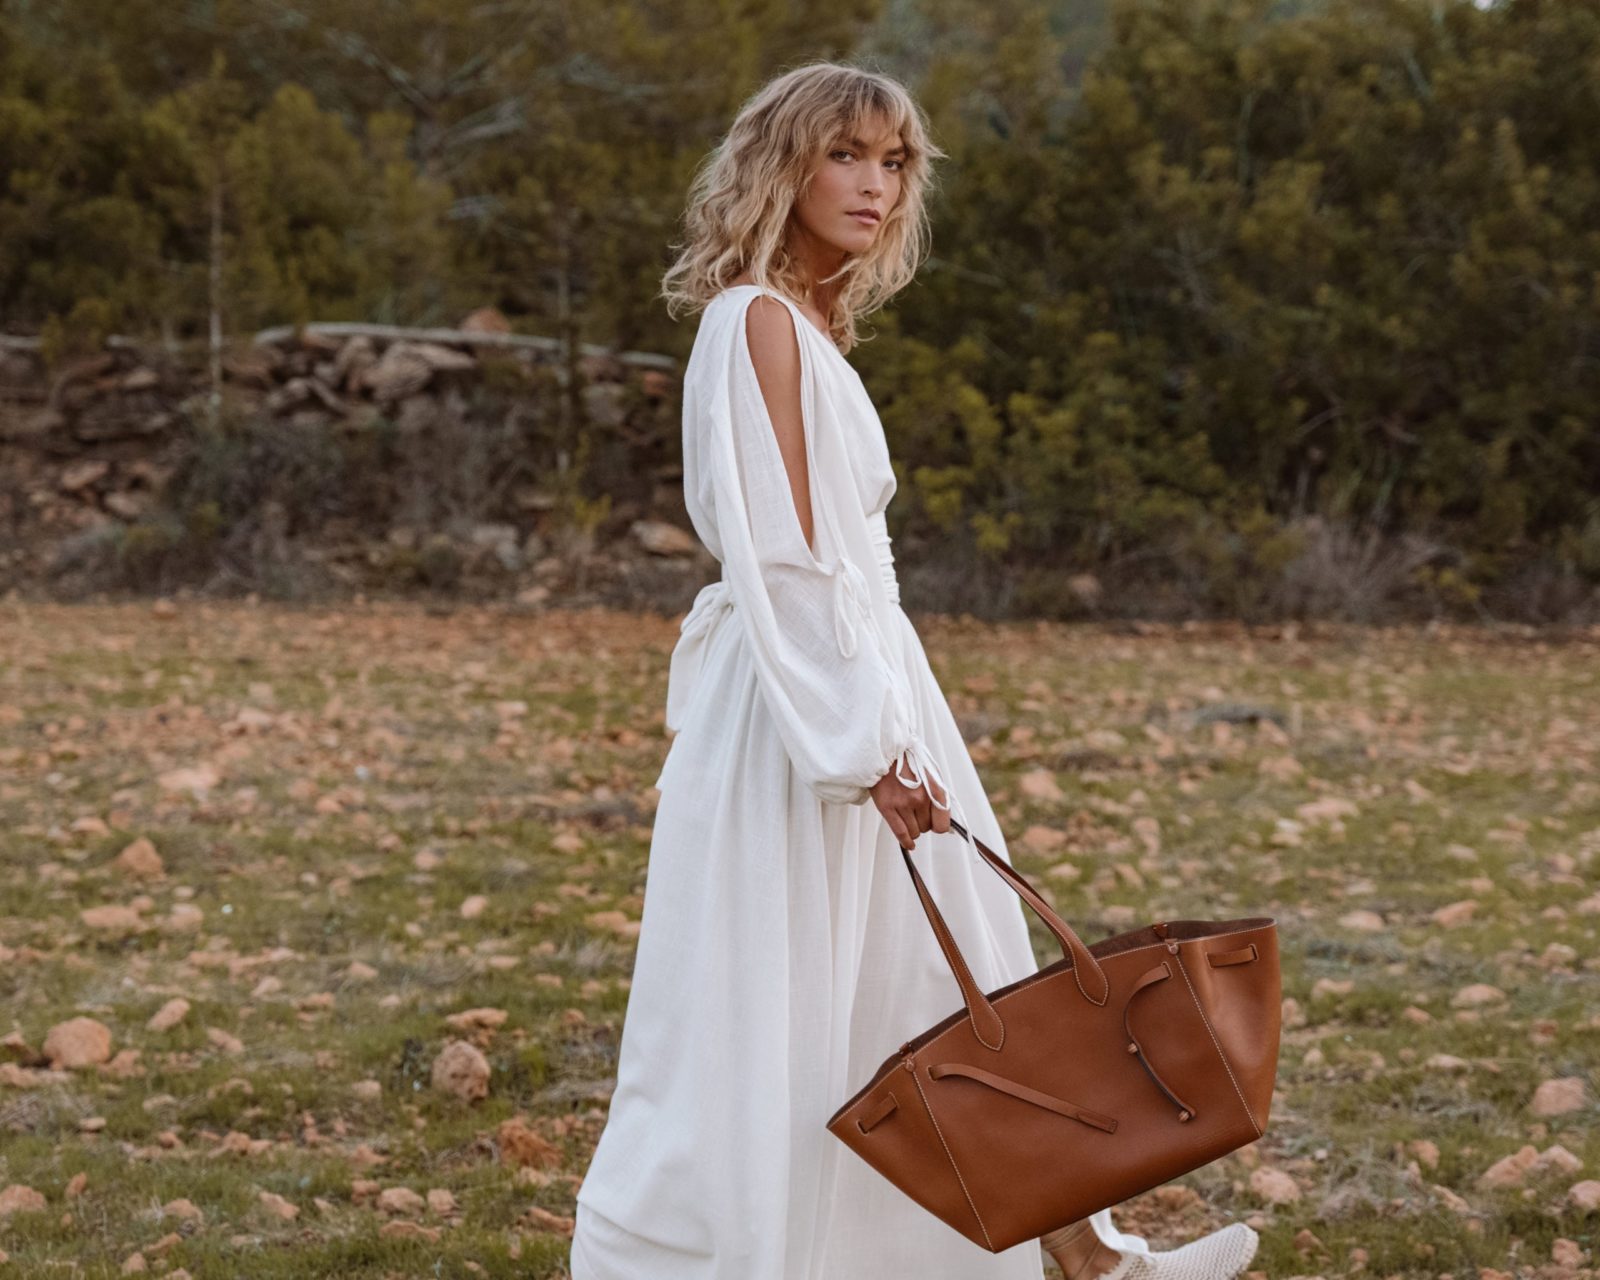 Arizona Muse, Anya Hindmarch has created an ingenious - and deeply covetable - bag collection that can decompose back to earth